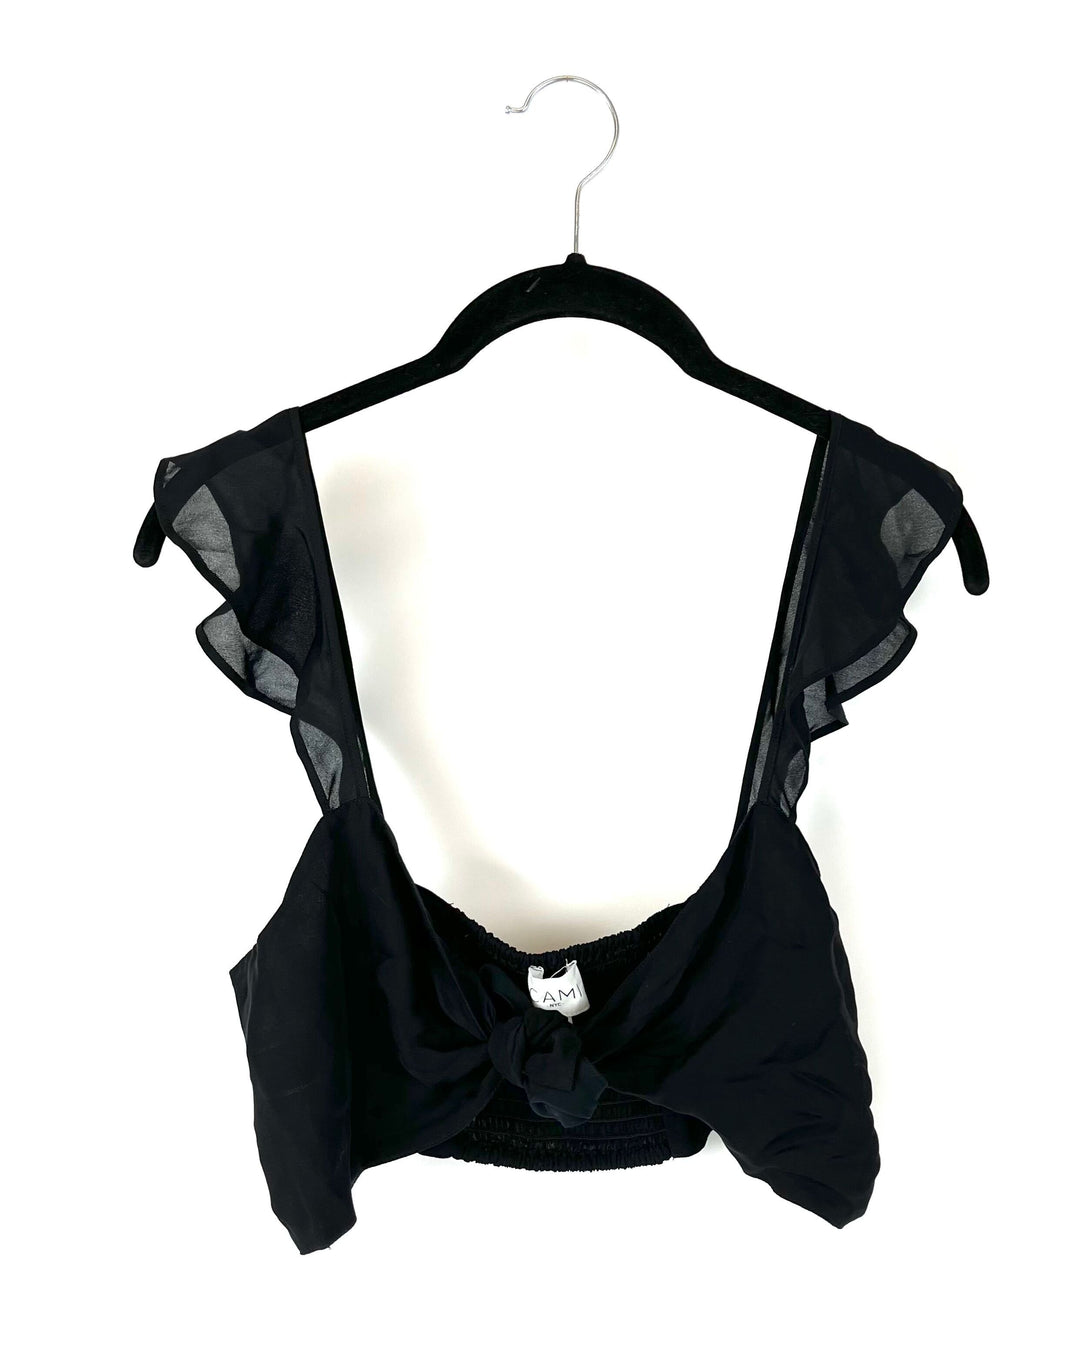 Cropped Black Tie Top - Size 4-6